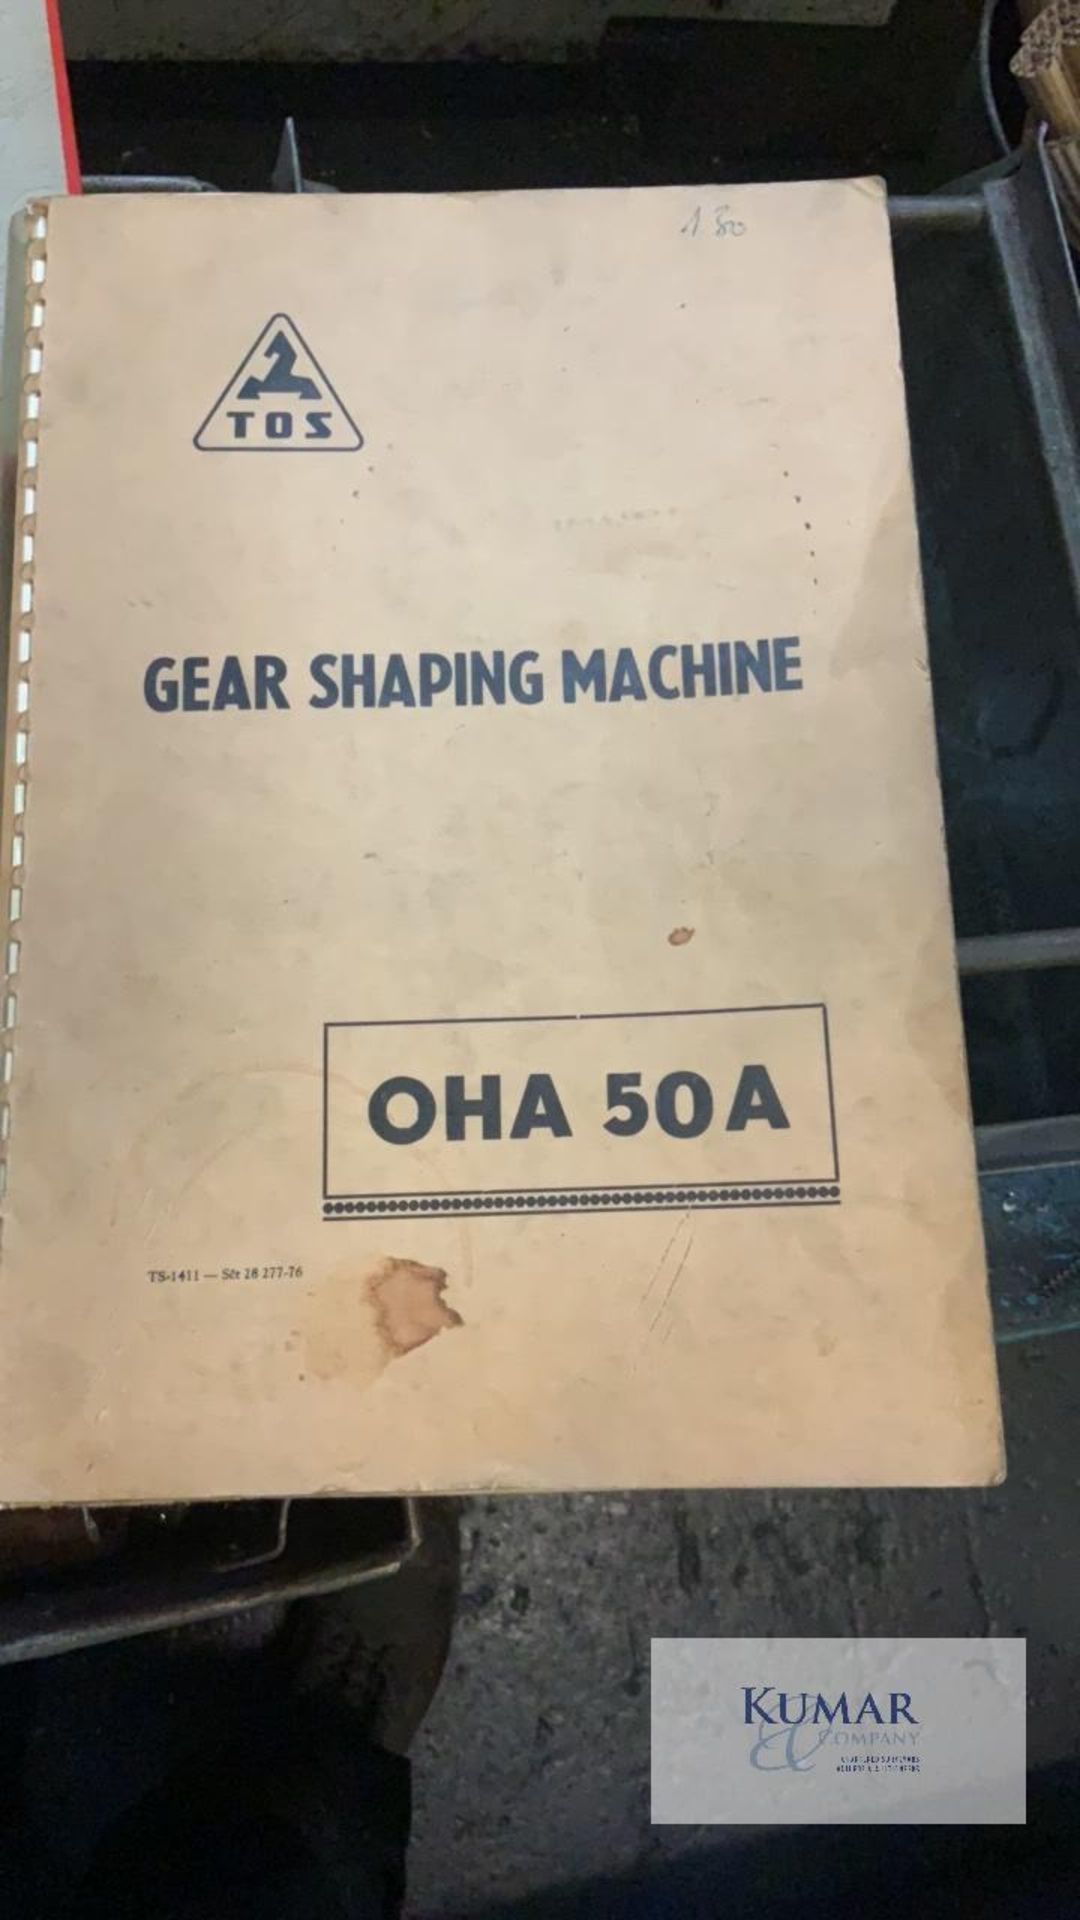 Tos Model No OHA 50 A Gear shaping machine with change gears - Collection Date Thursday 3rd March - Image 7 of 11